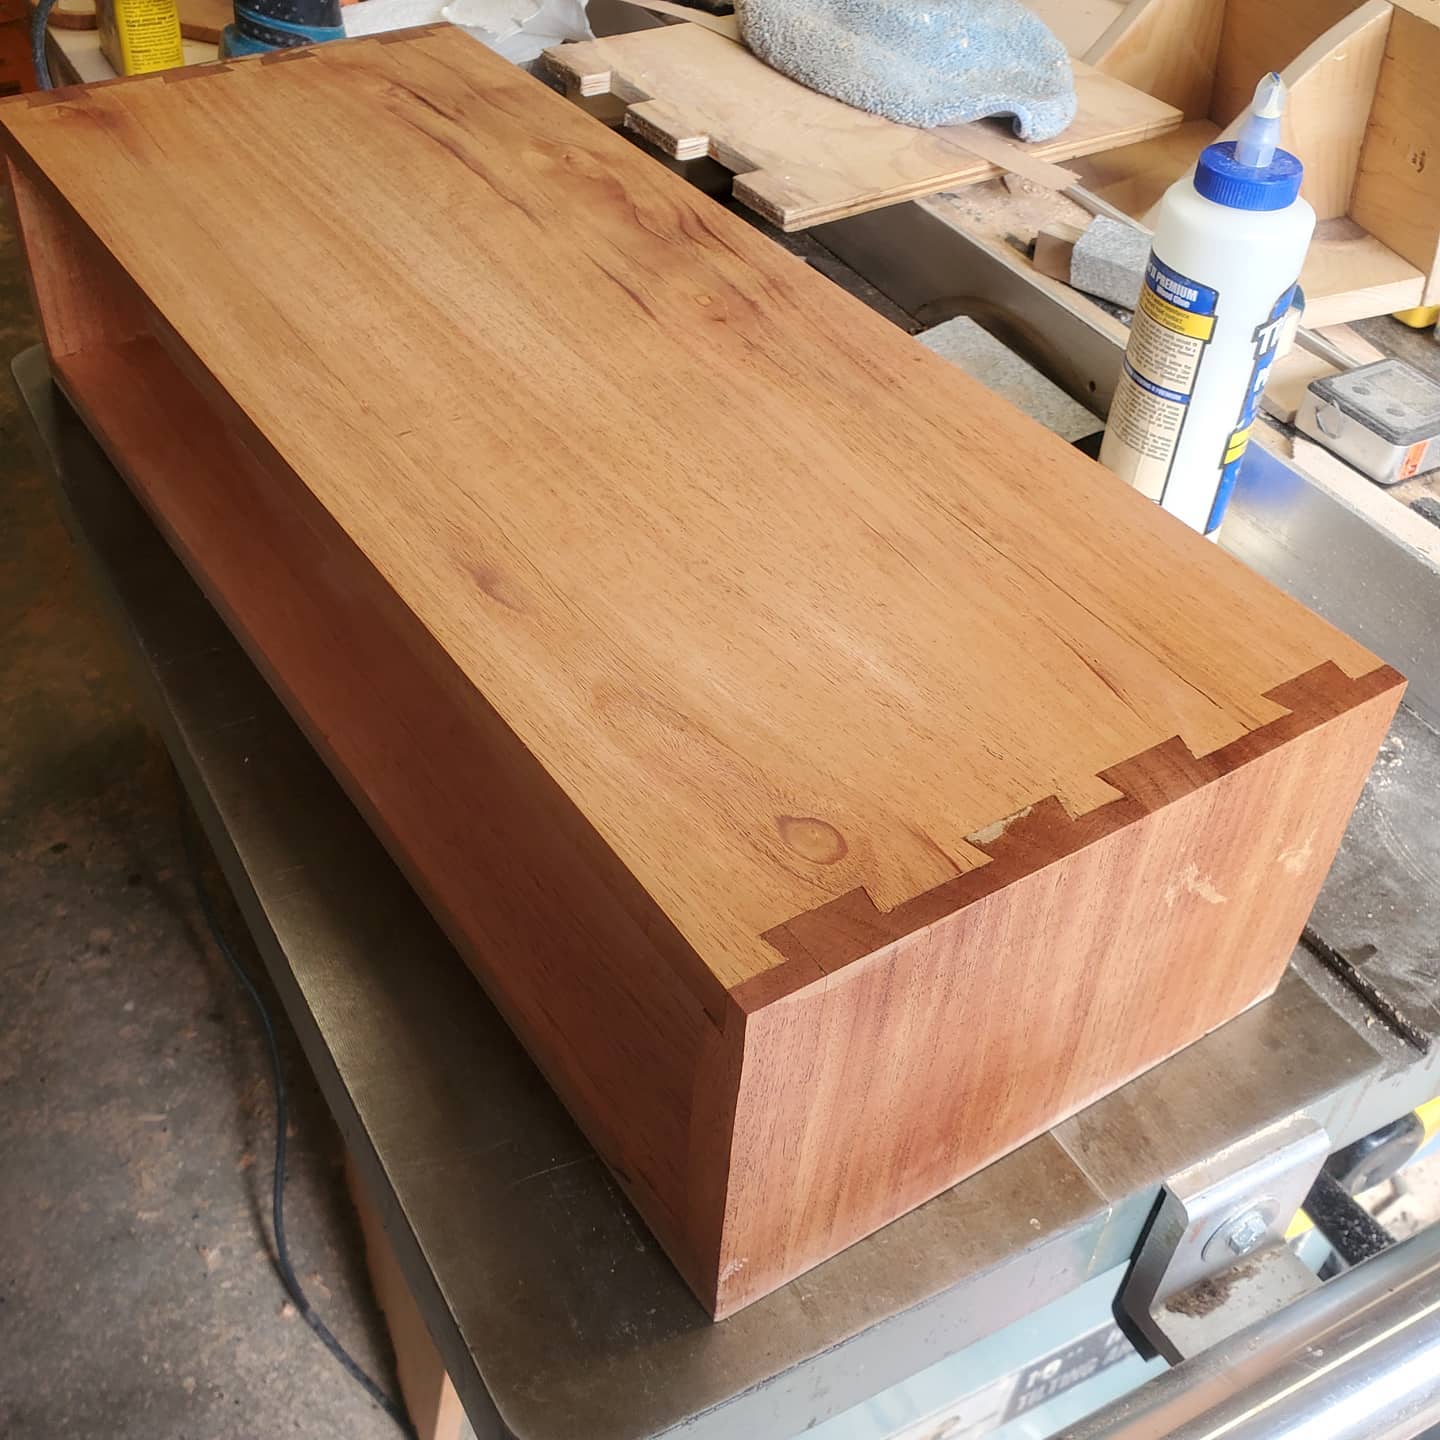 A mahogany head-shell for a bass amplifier with dovetail joints.